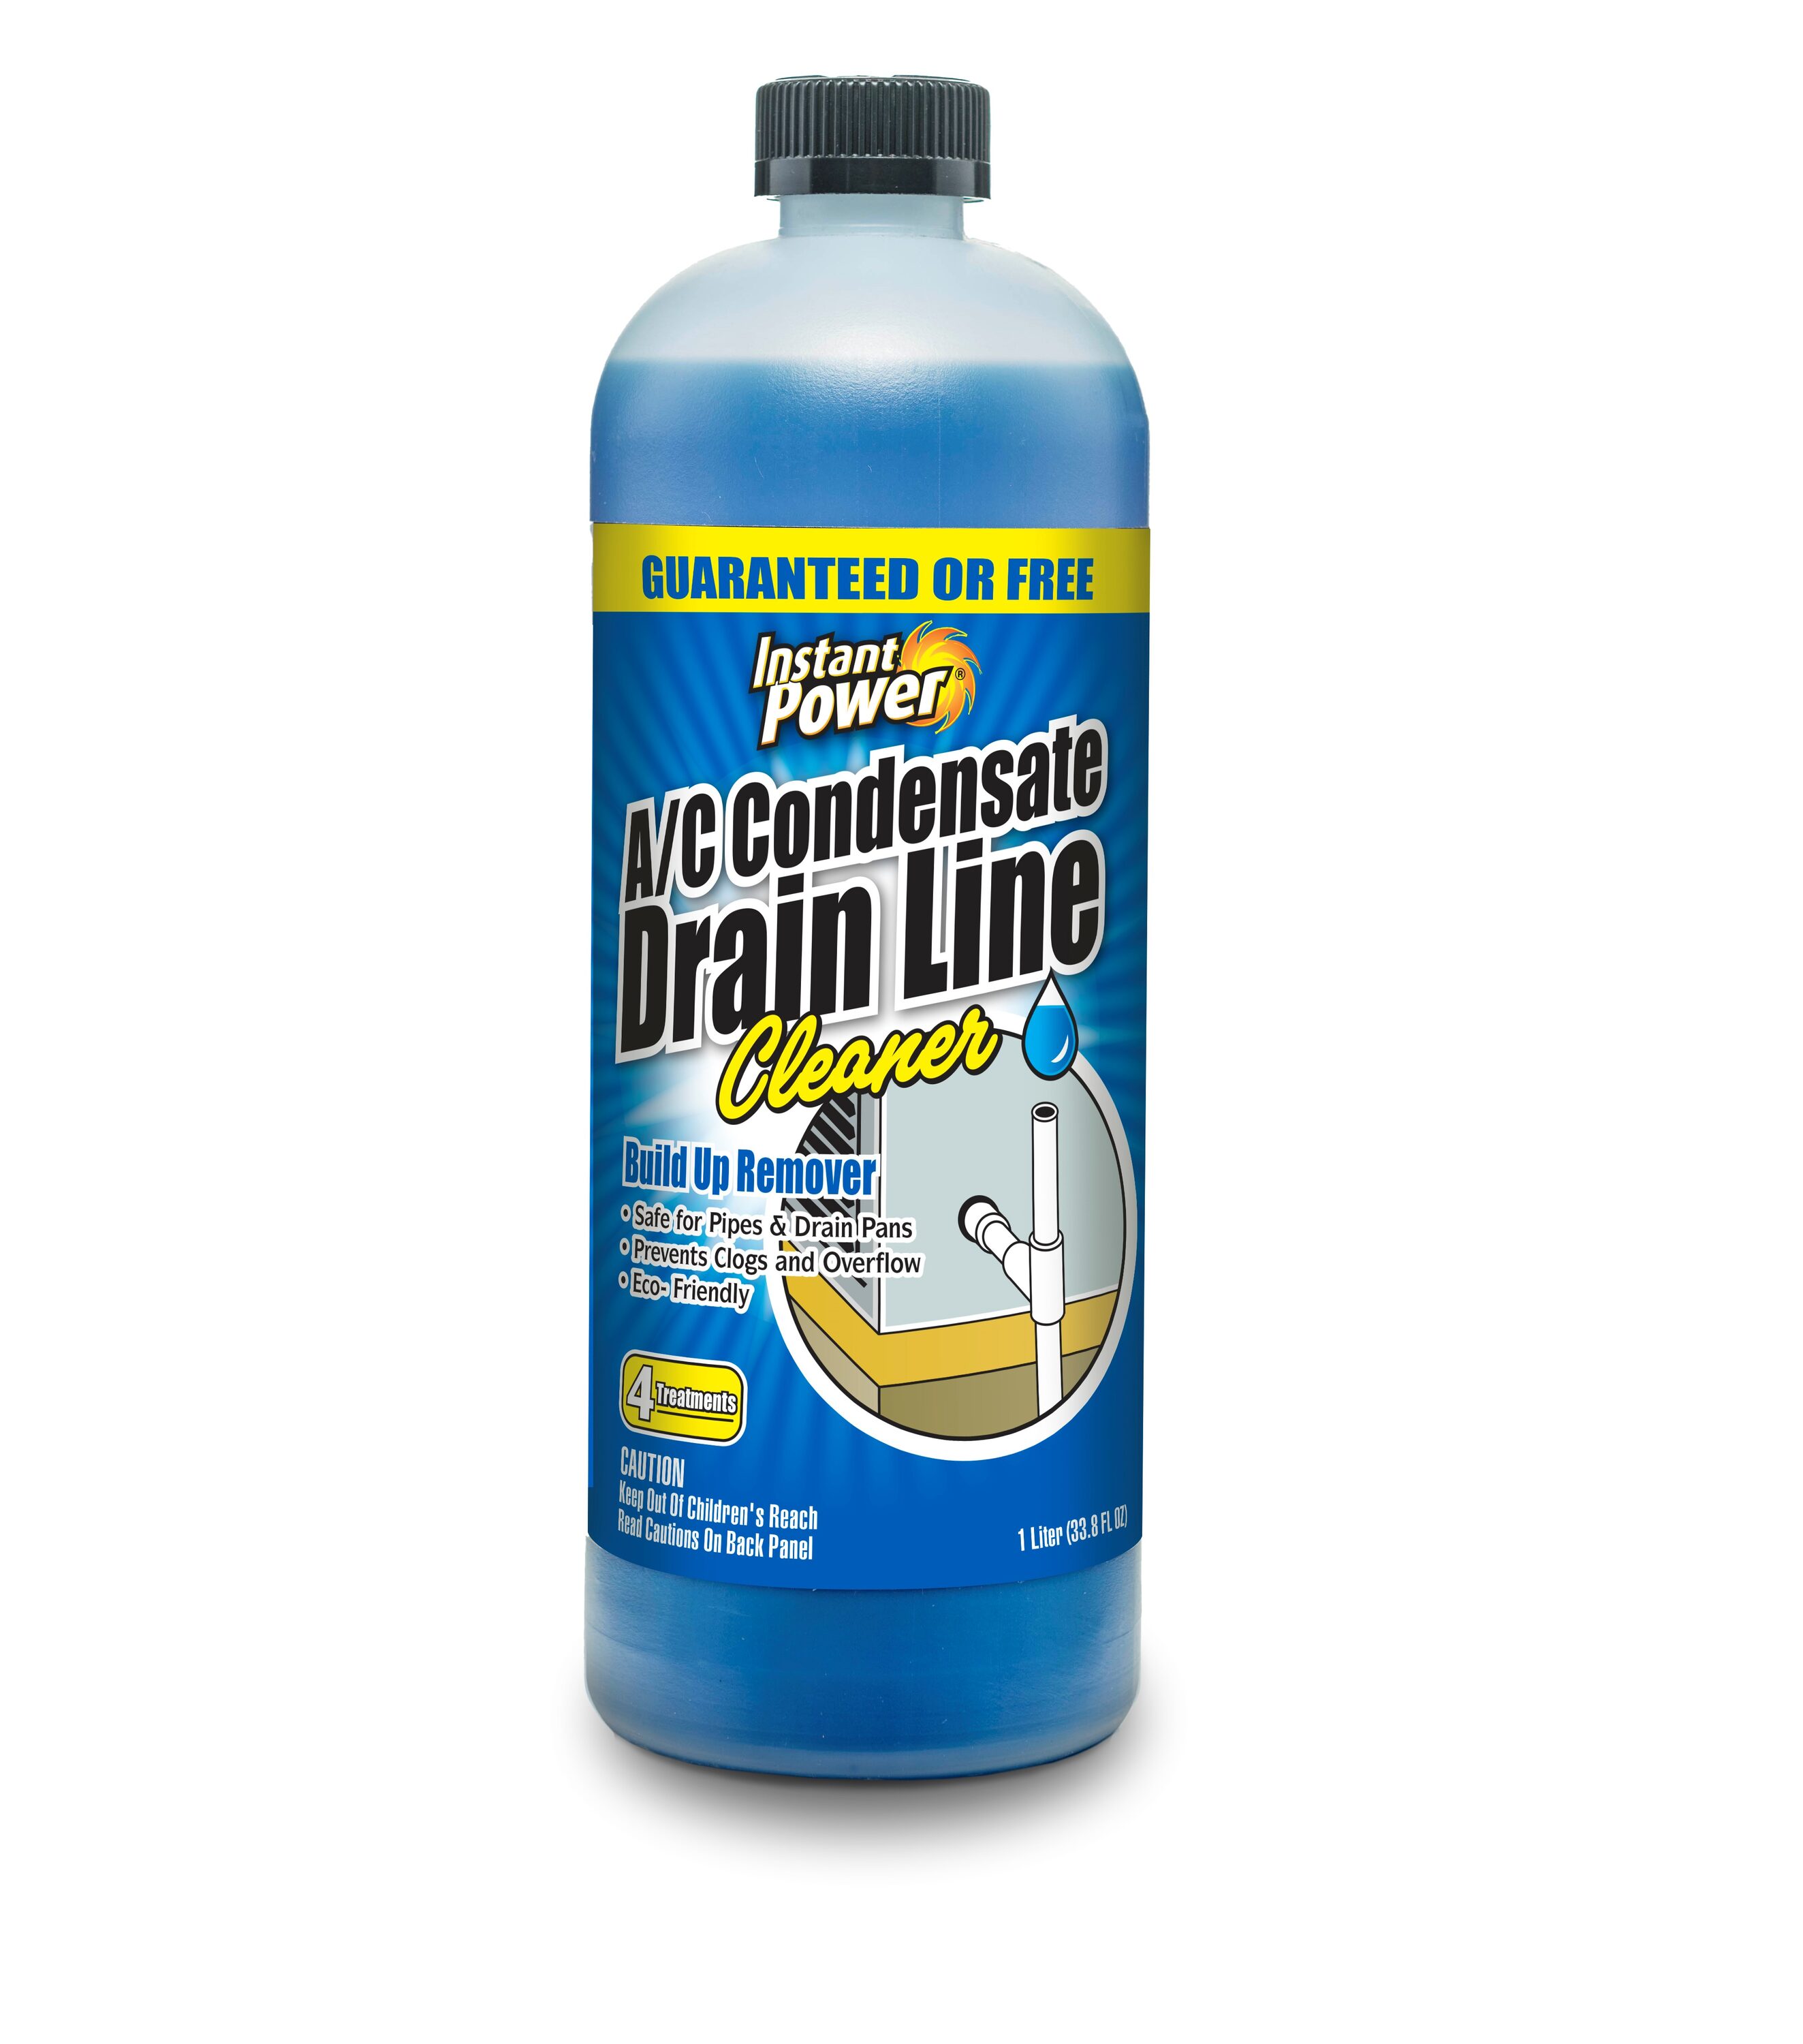 Instant Power - Main Line Cleaner 1 Gal